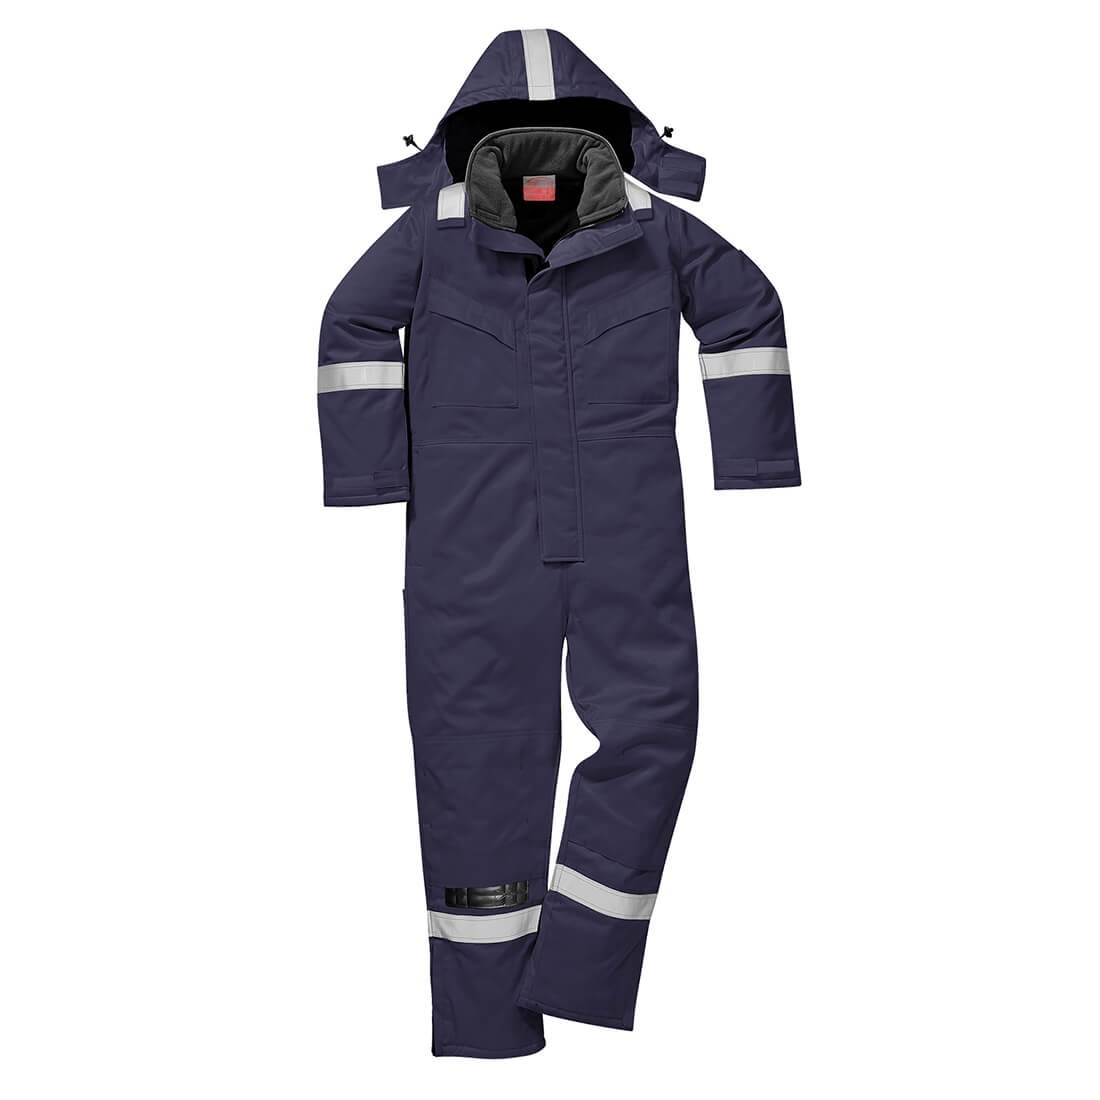 Image of Biz Flame Mens Flame Resistant Antistatic Winter Overall Navy Blue S 32"